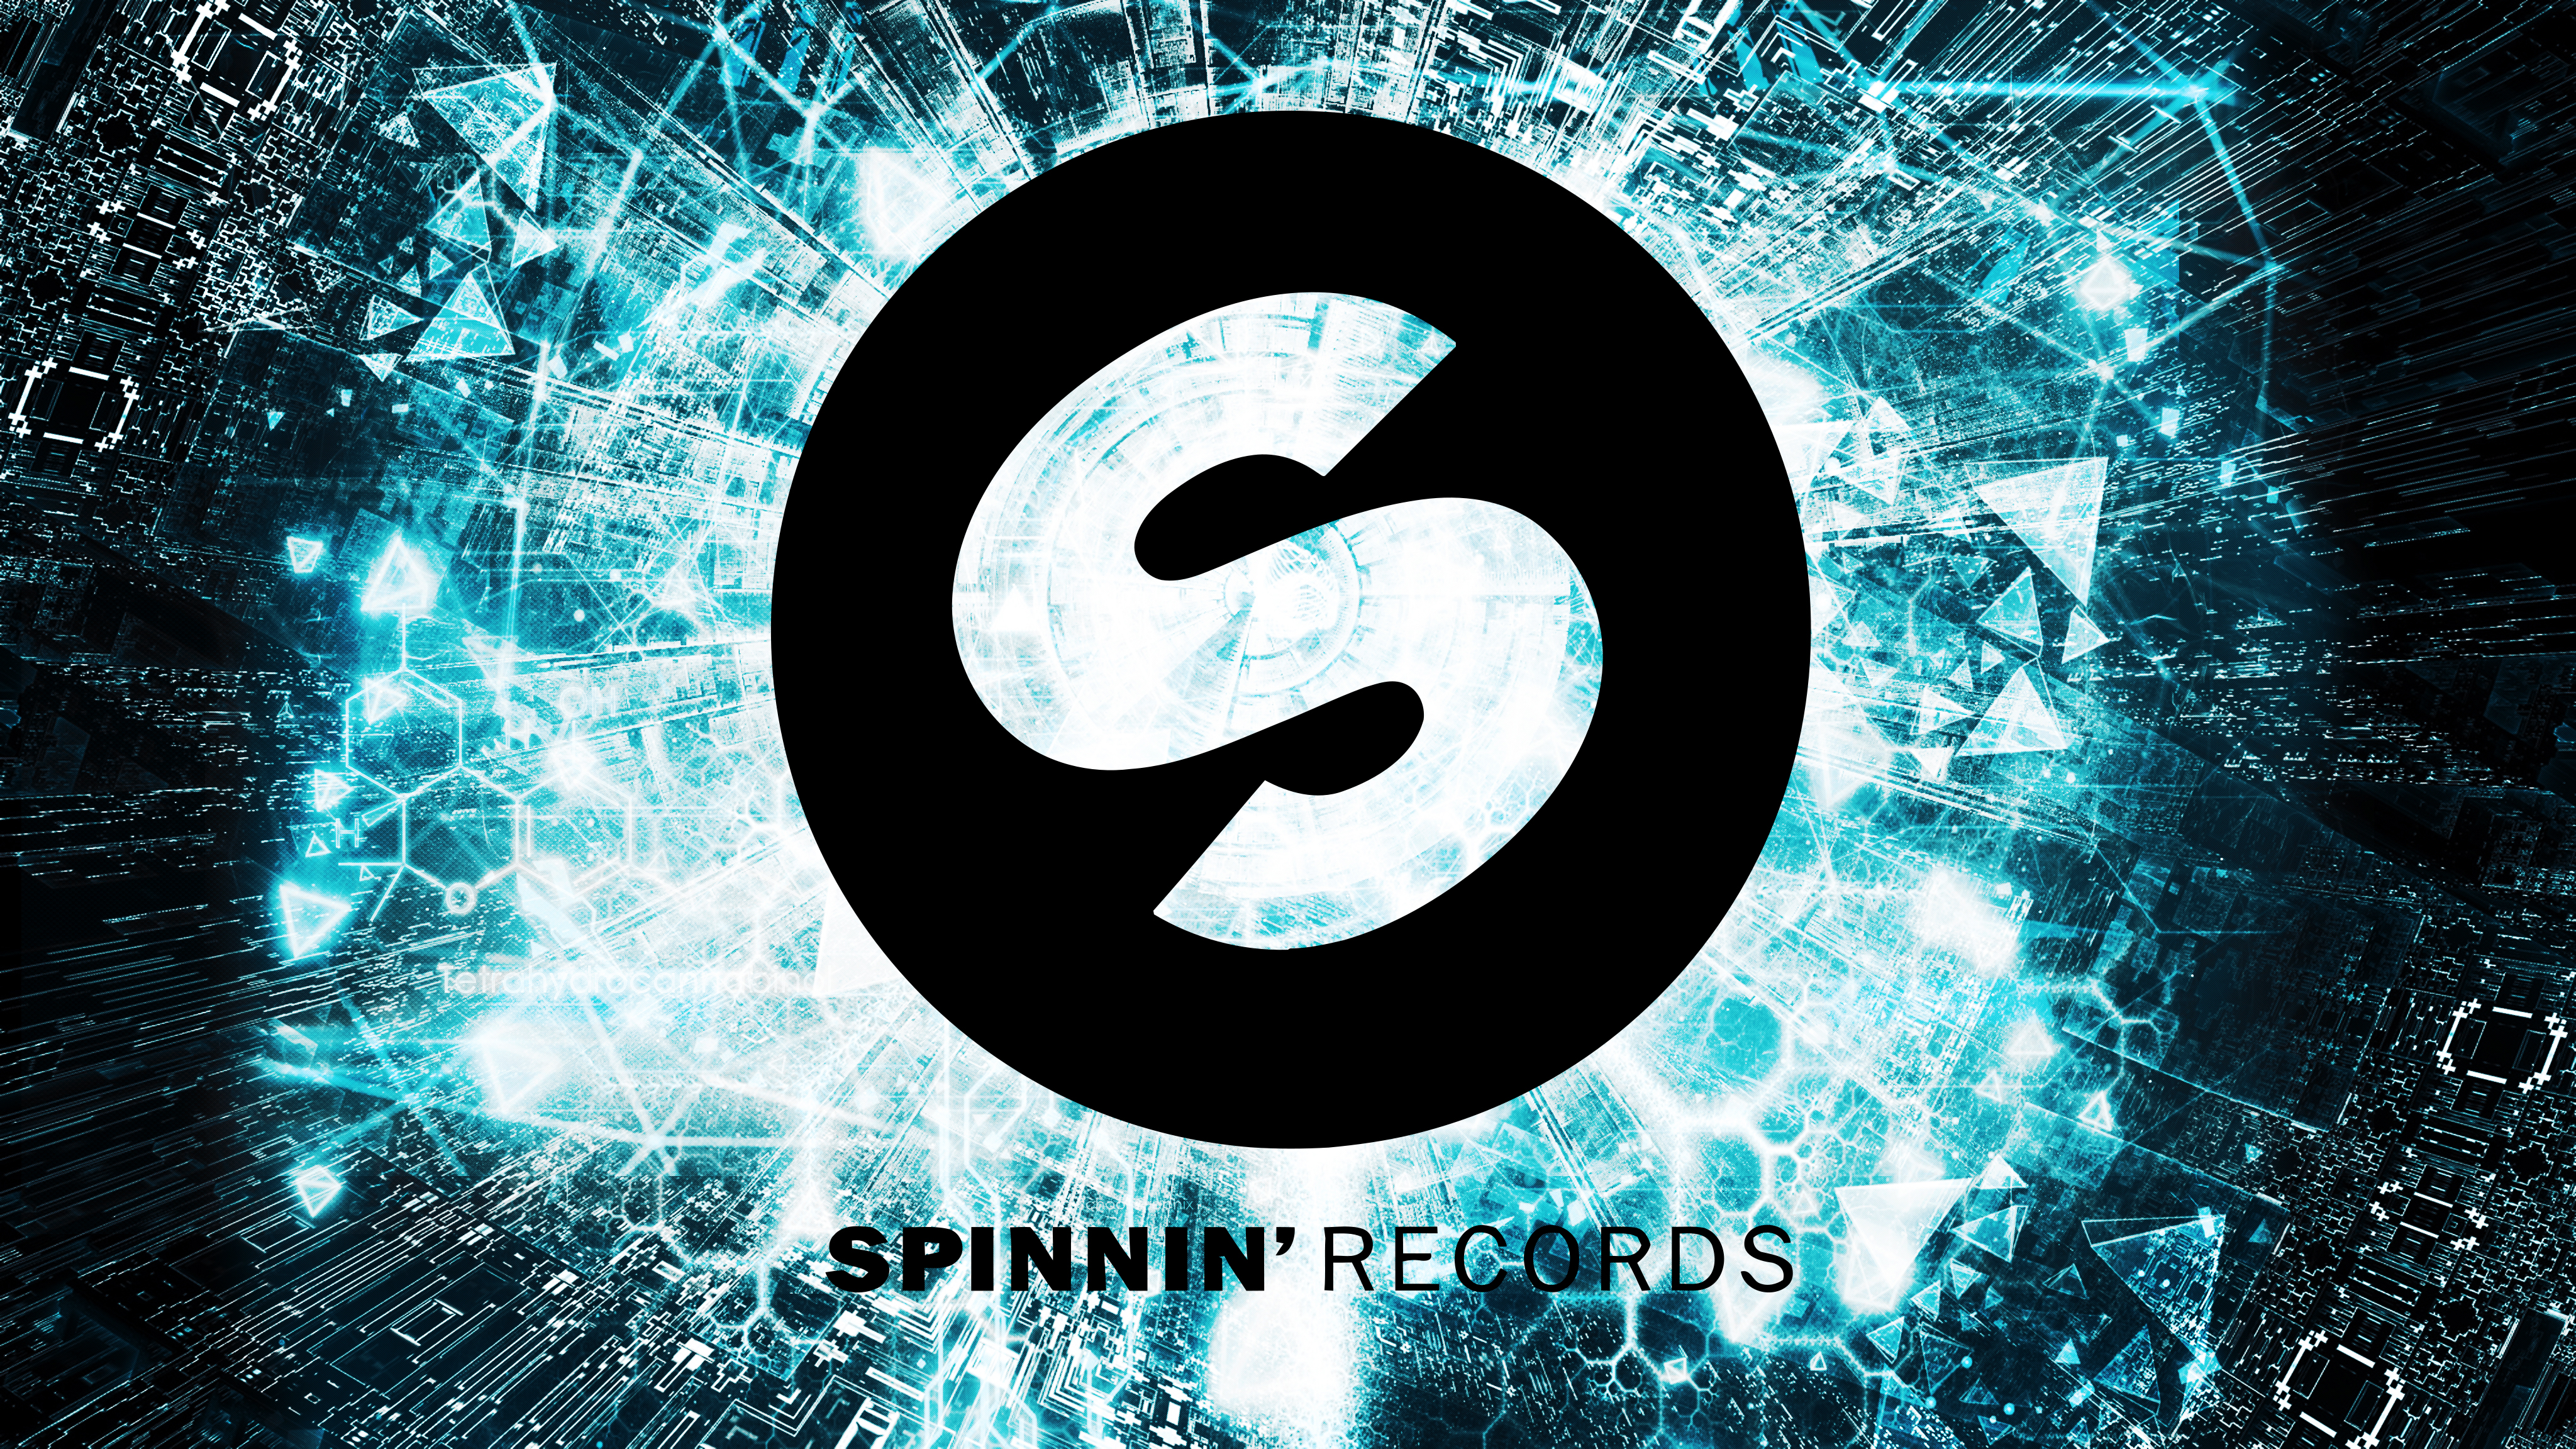 Spinnin' Records by HexsProduction.